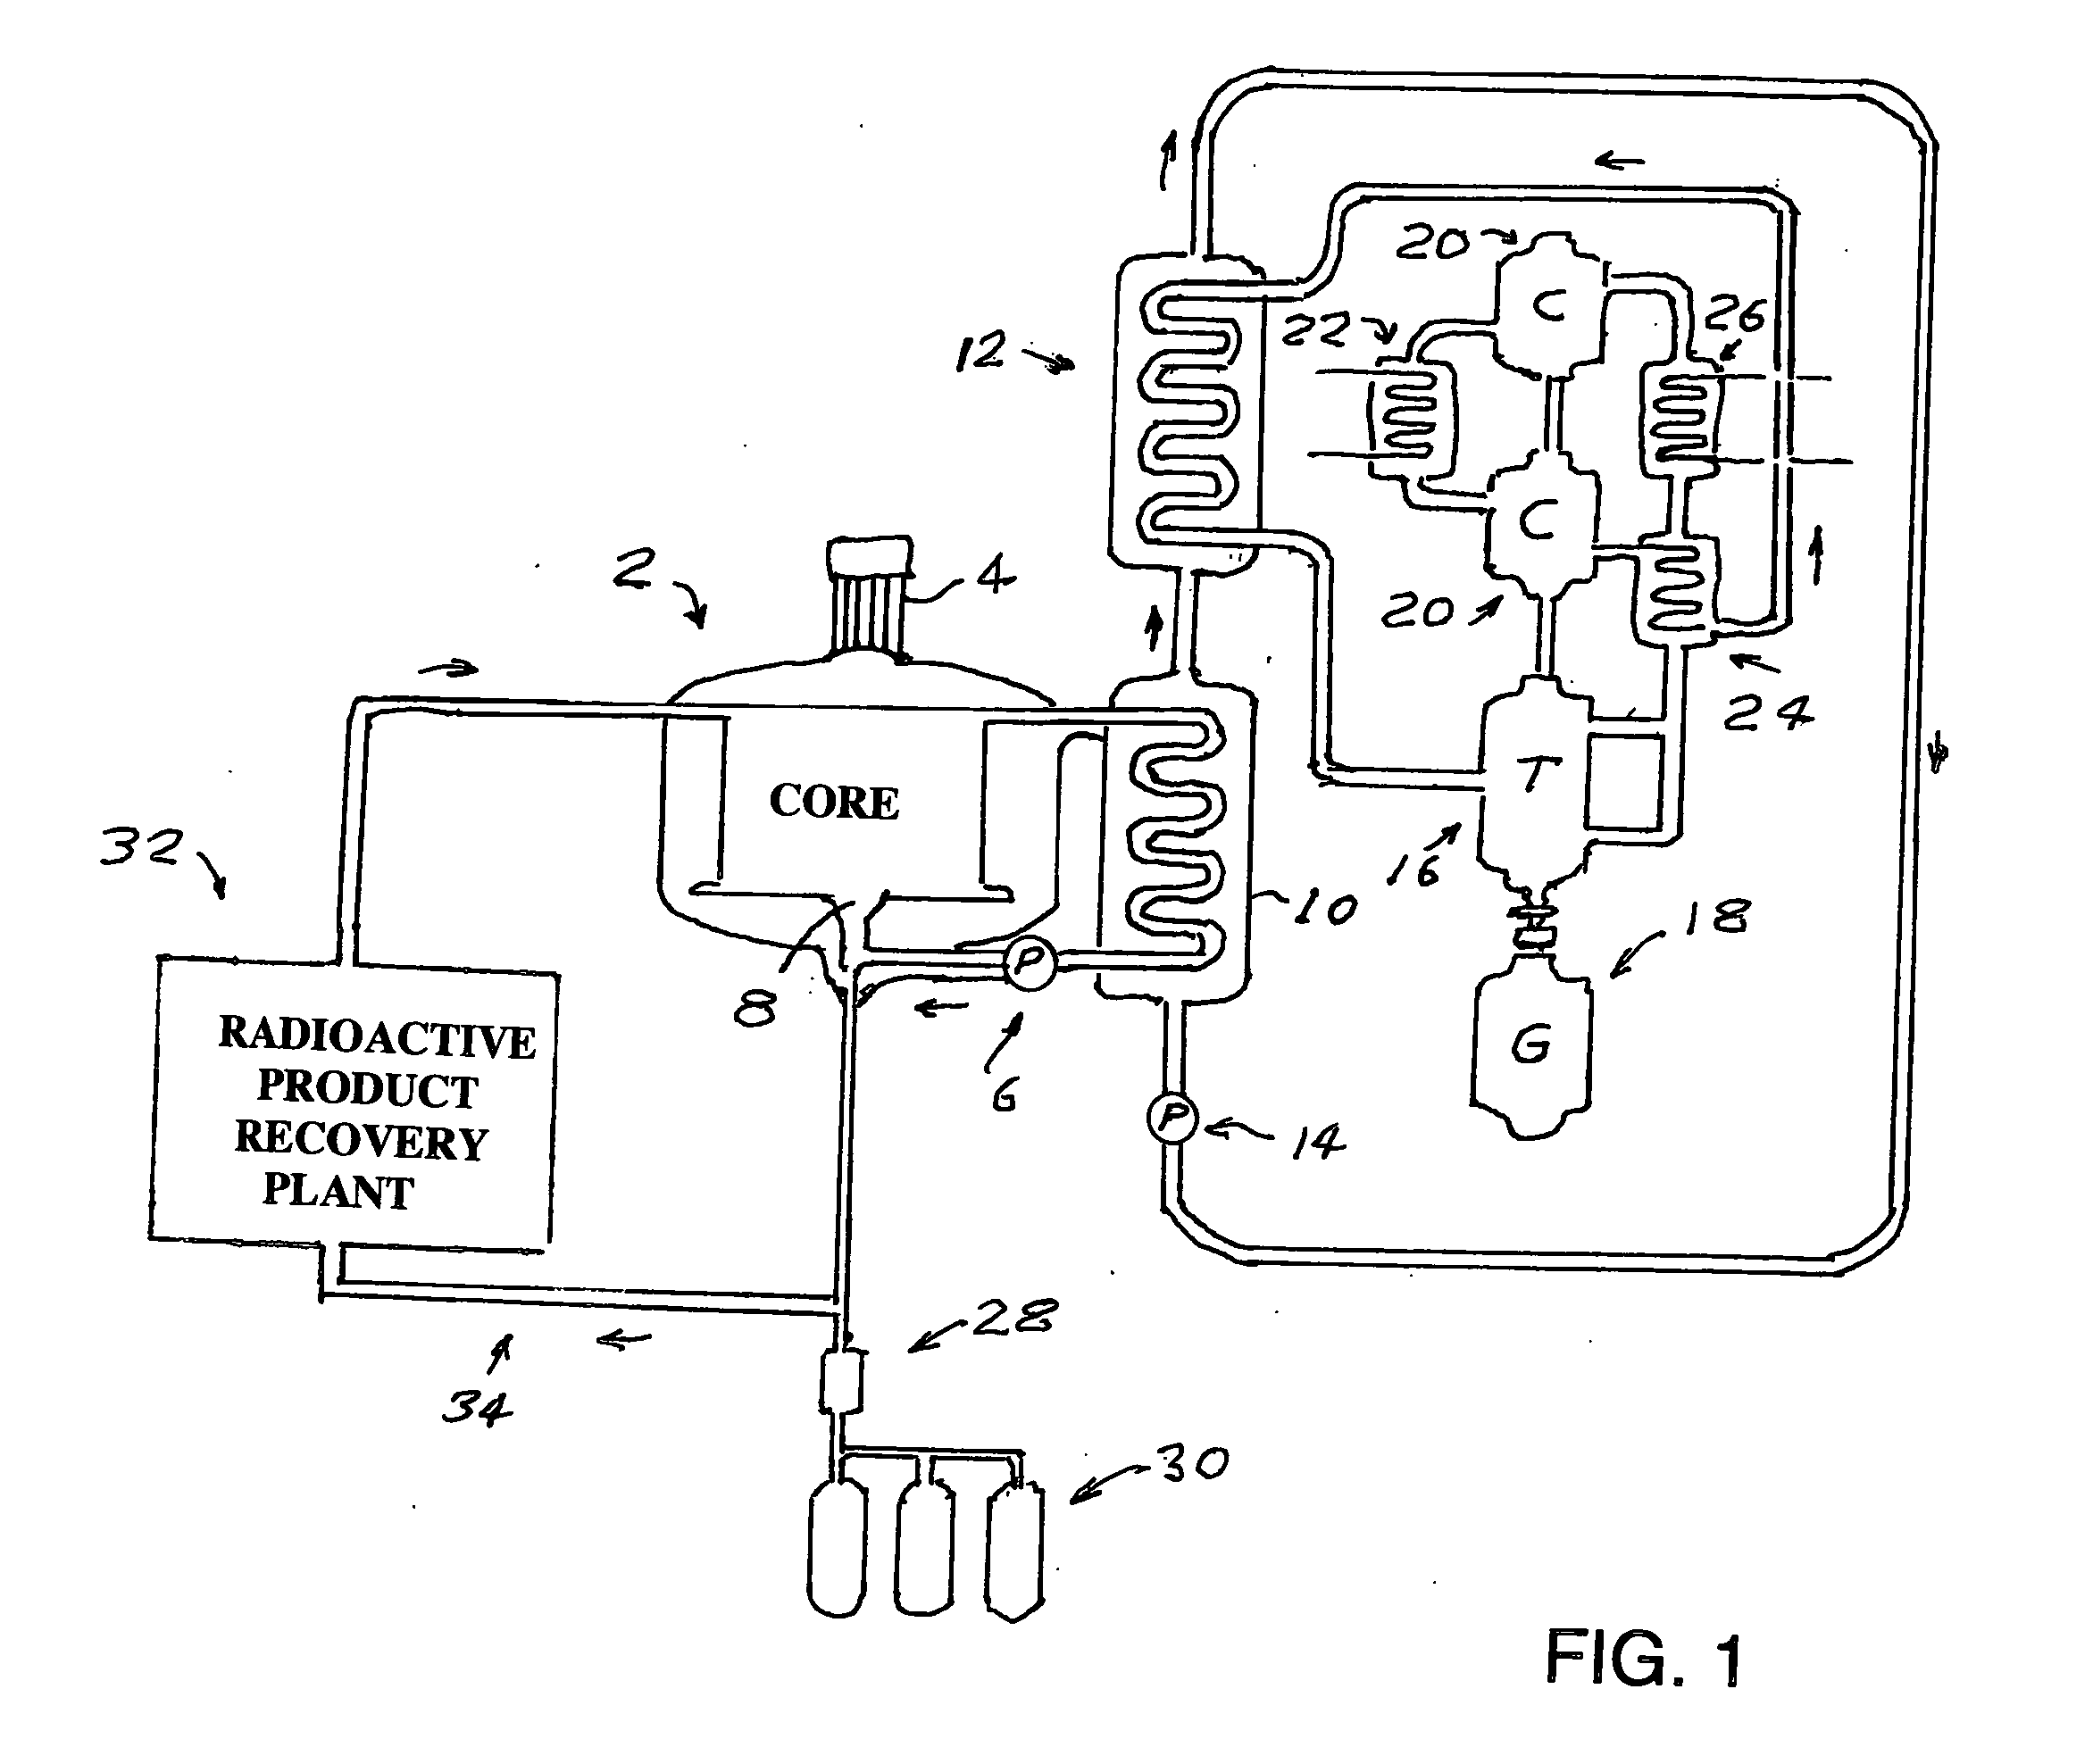 Liquid Lithium Cooled Fission Reactor for Producing Radioactive Materials